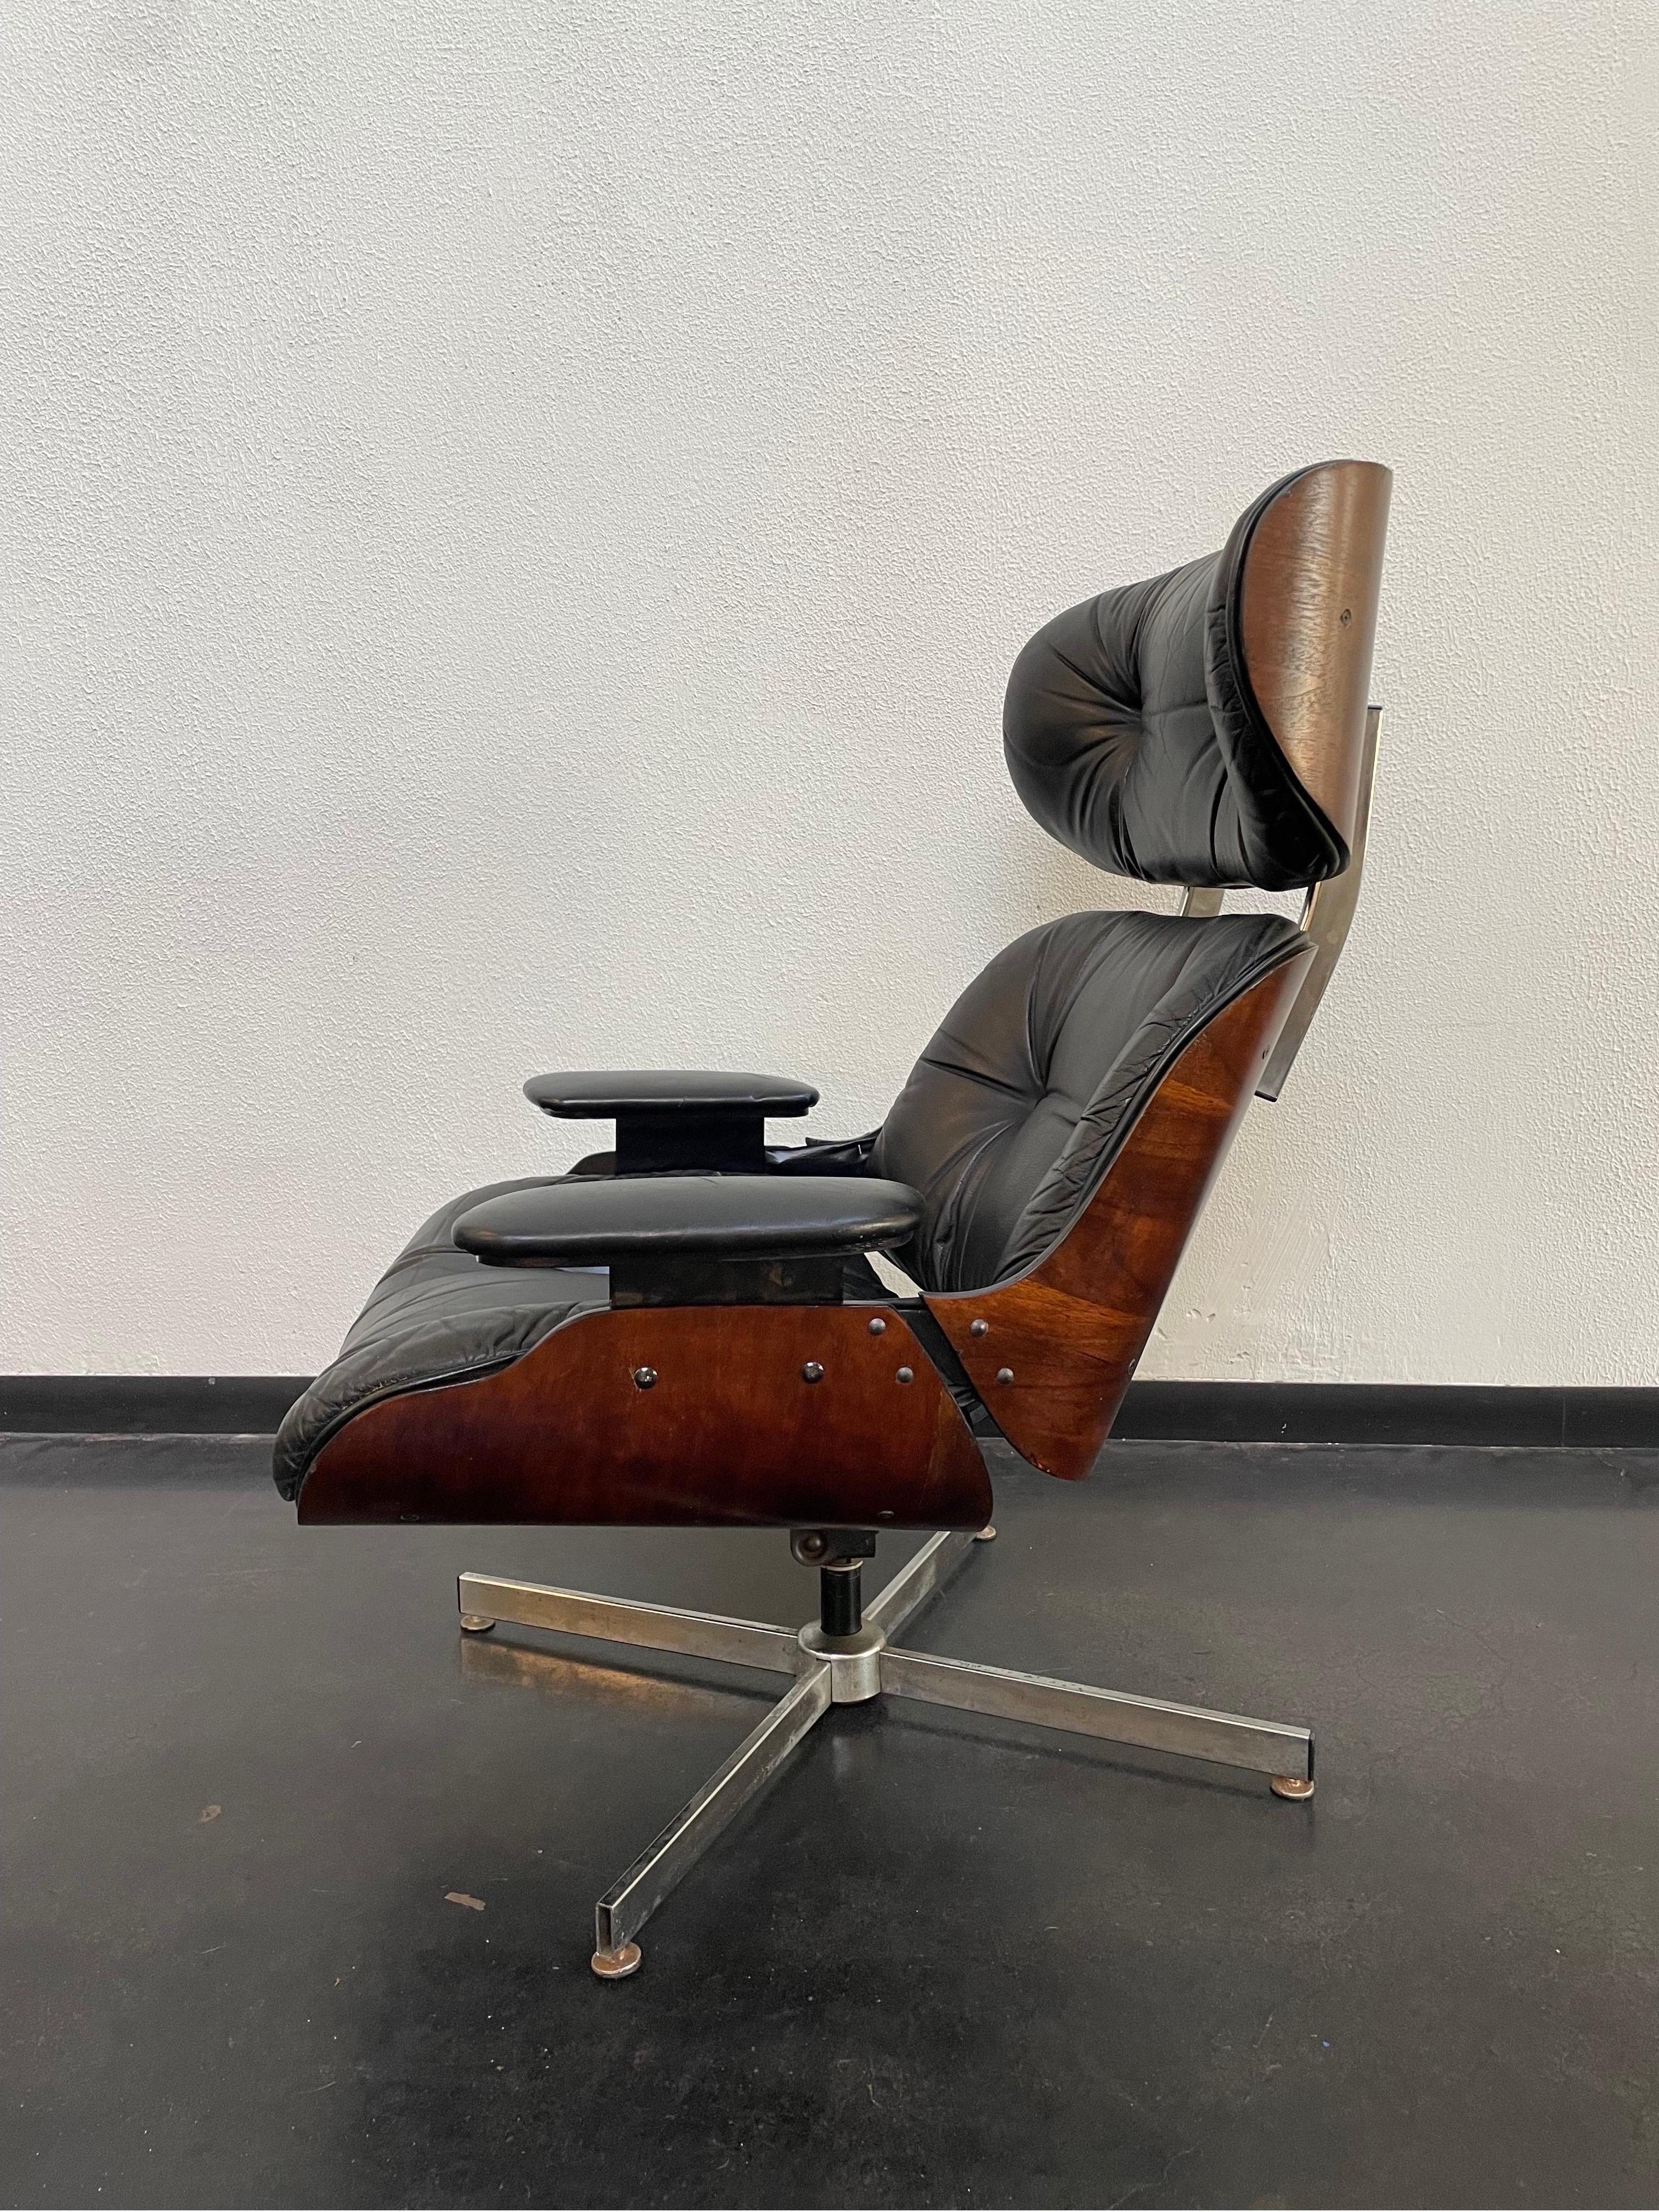 Plycraft chair in the style of the famous Charles Eames 670/671 lounge chair.